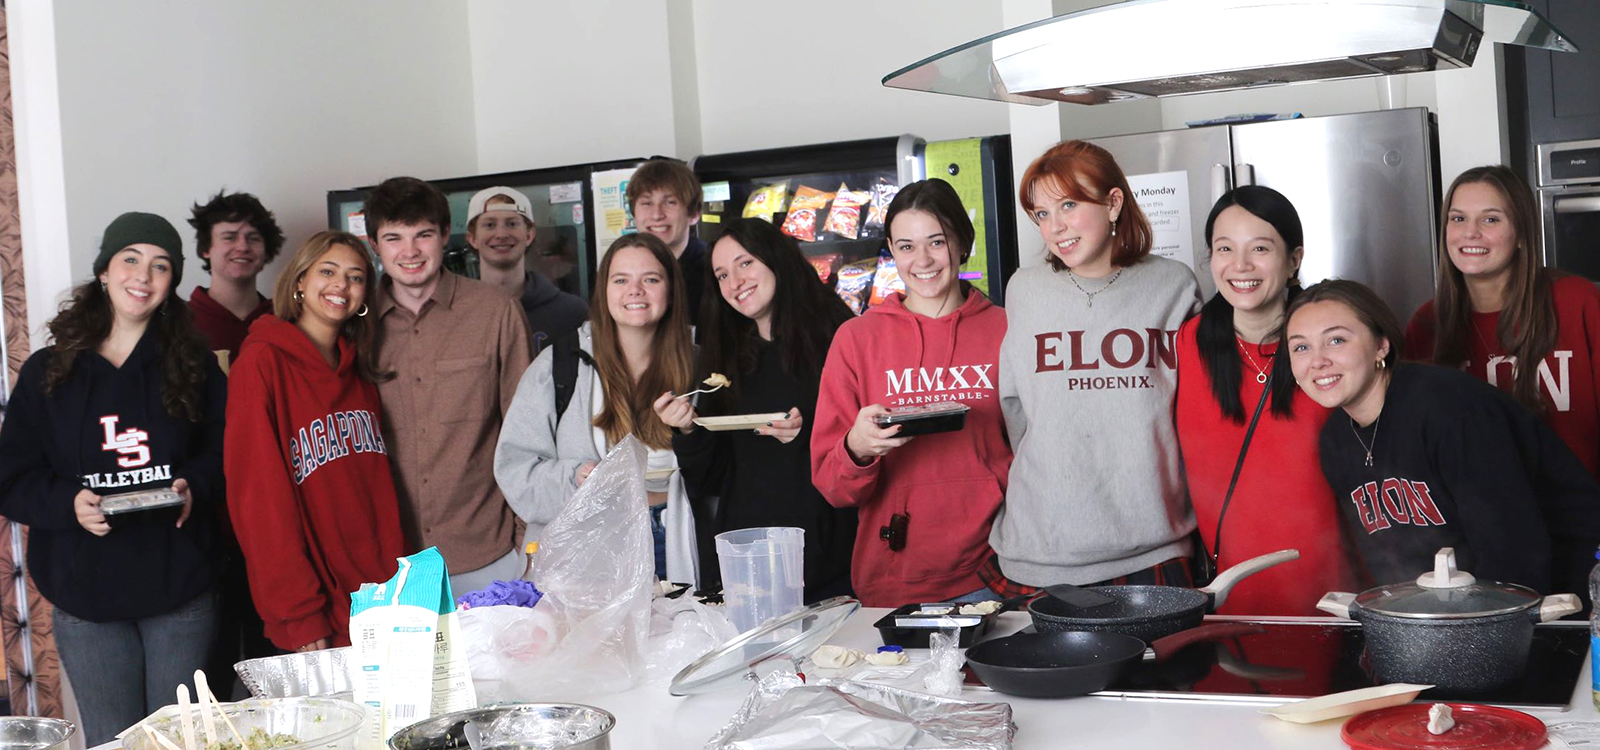 A group of 12 students gather in a line in front of a stove top.